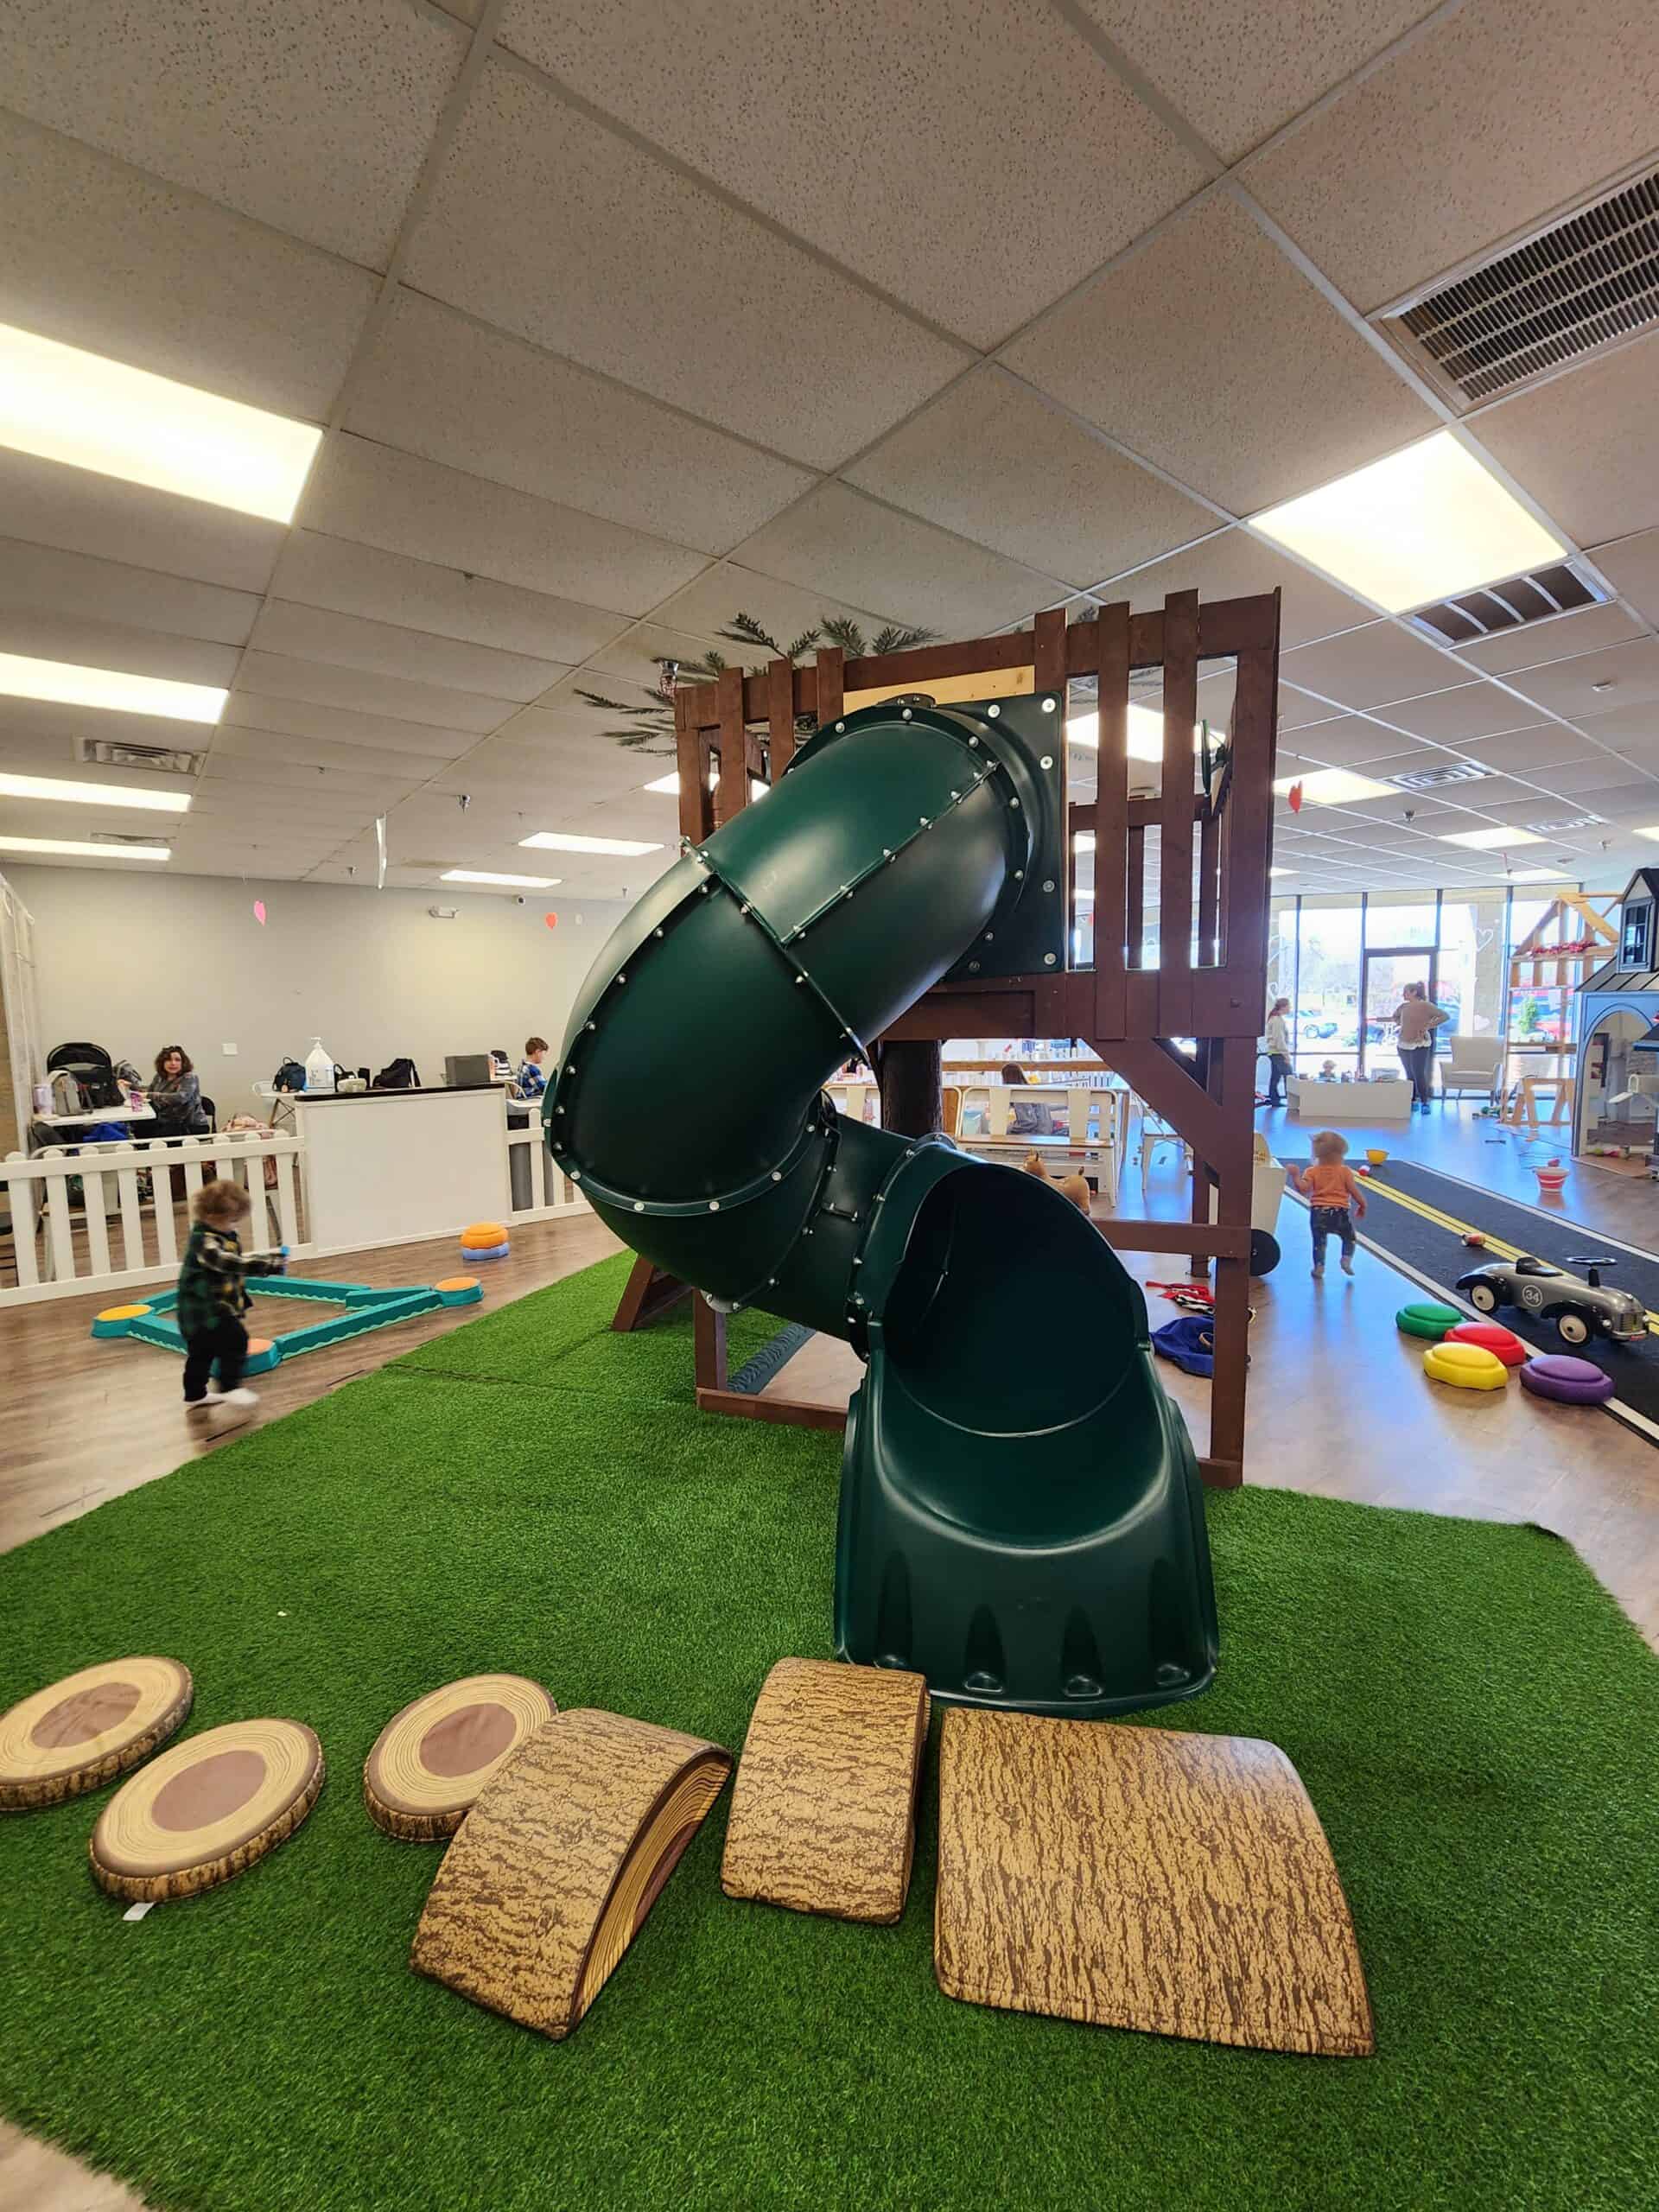 A vibrant green slide spirals down from a wooden play structure at Piney Town Playhouse in Fuquay-Varina, NC, with a set of log-like stepping stones leading up to it on the artificial grass. Children enjoy playtime in the background with a view of the indoor play town